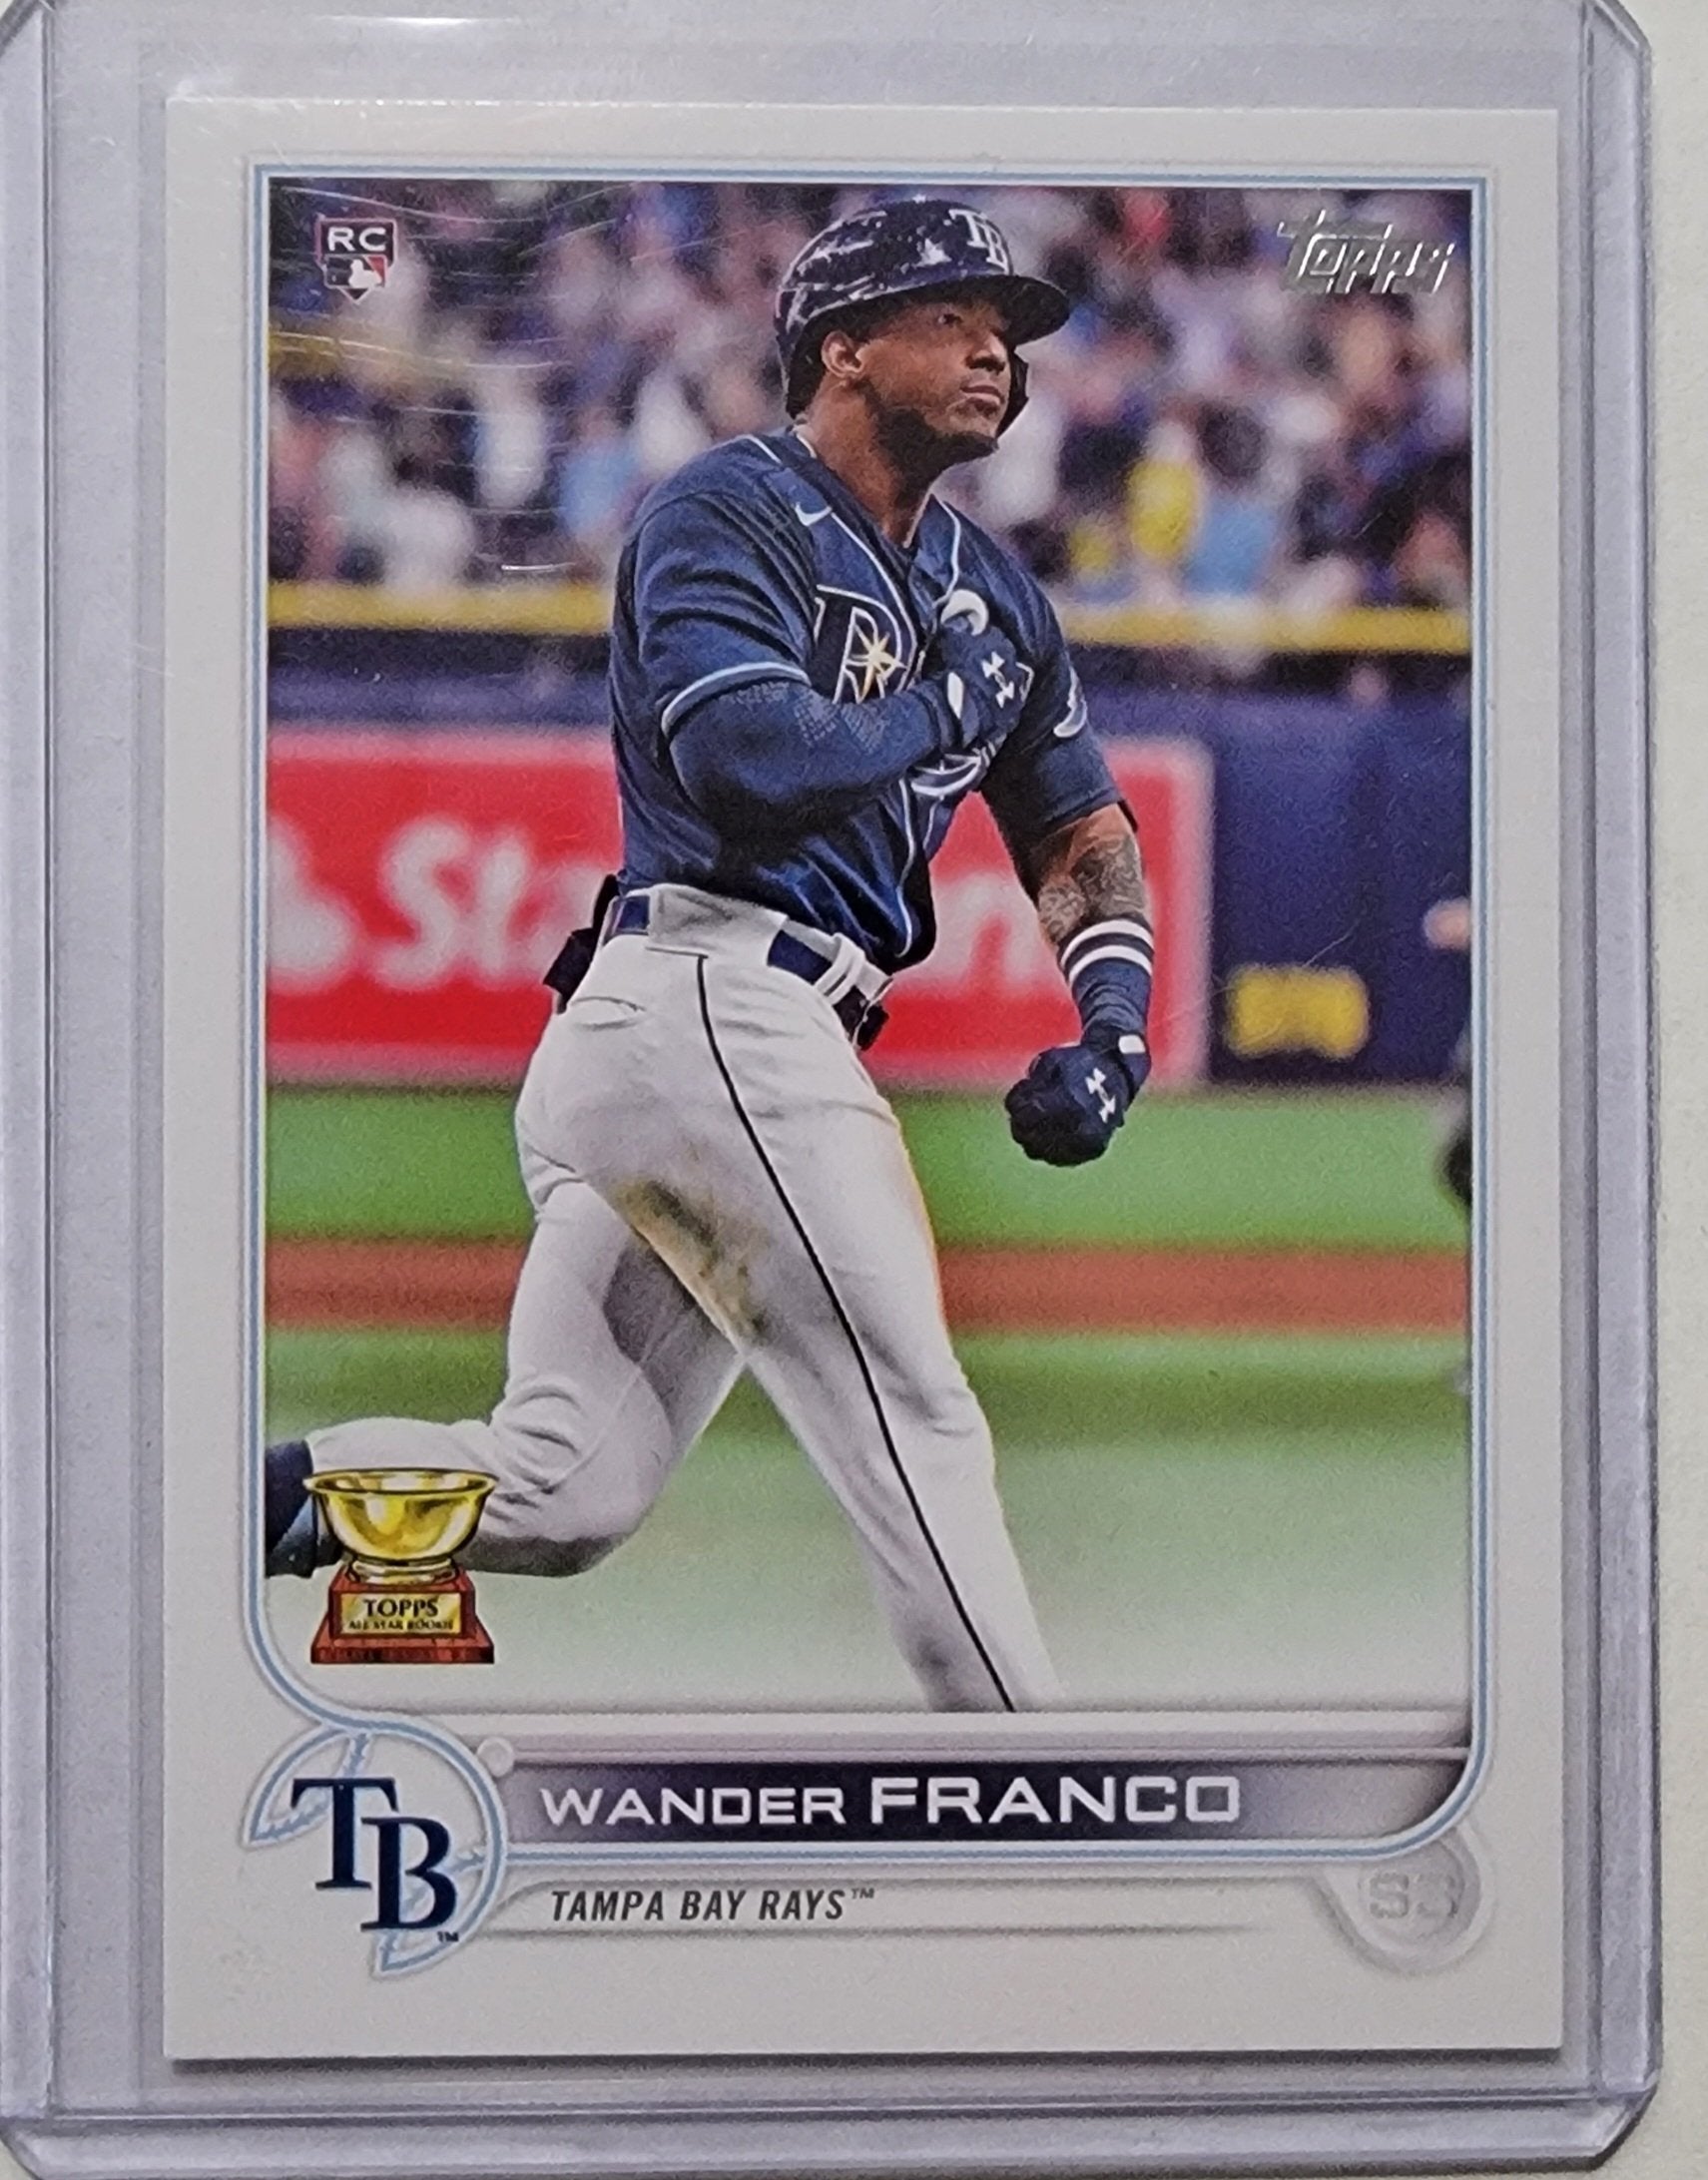 2022 Topps Wander Franco Rookie Cup All Star Baseball Card AVM1